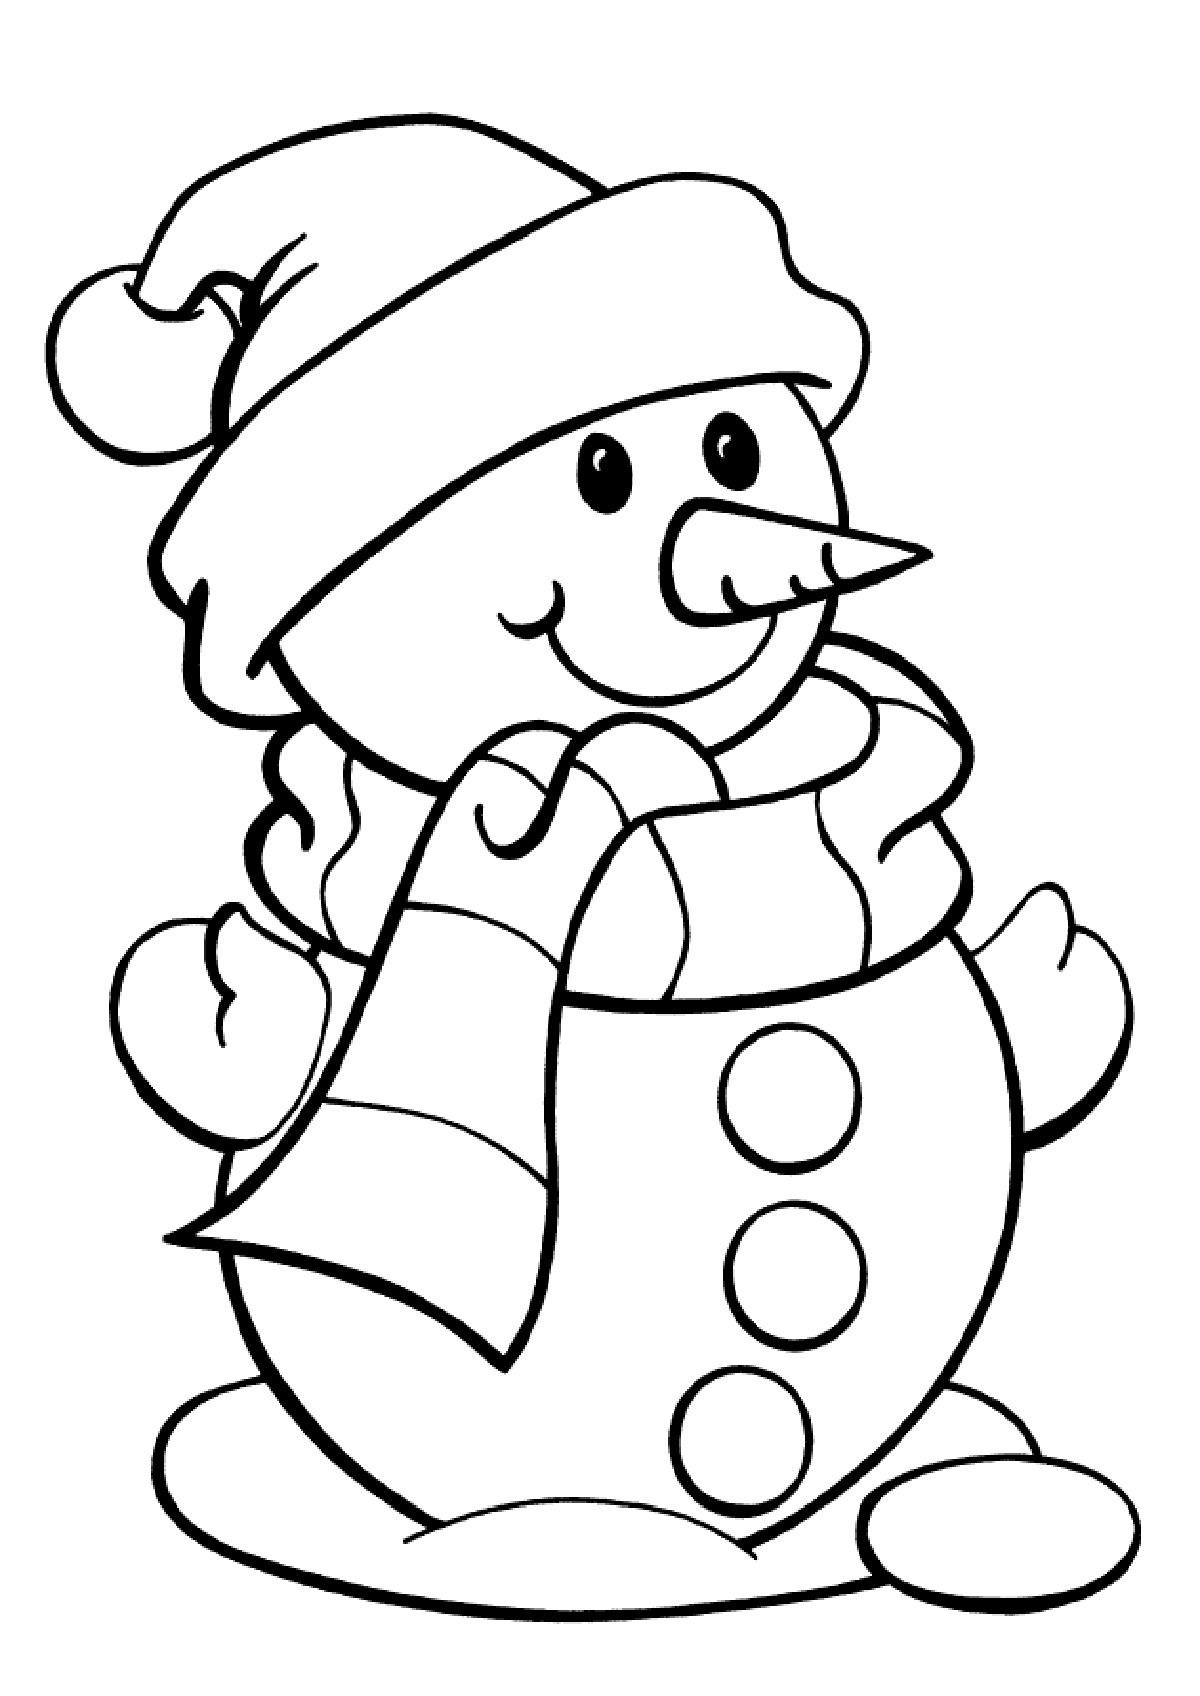 Snowman Printable Coloring Pages
 Coloring Coloring